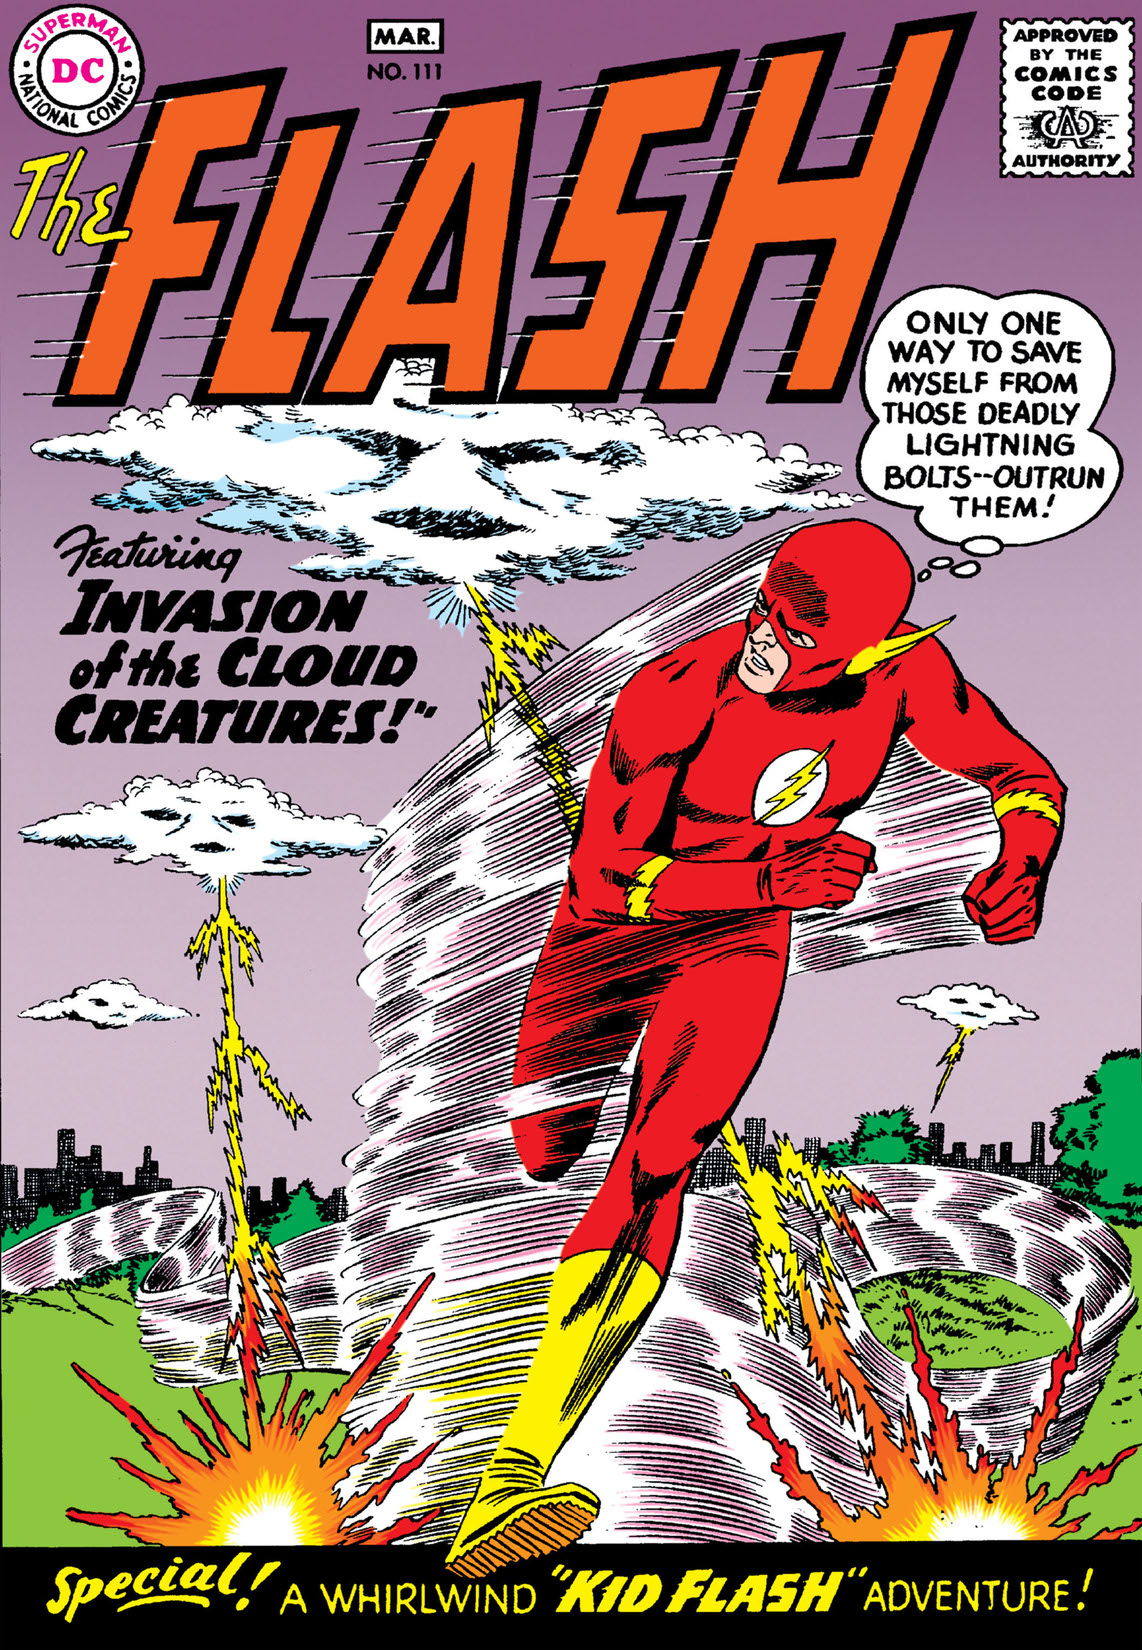 The Flash (1959-) #111 preview images